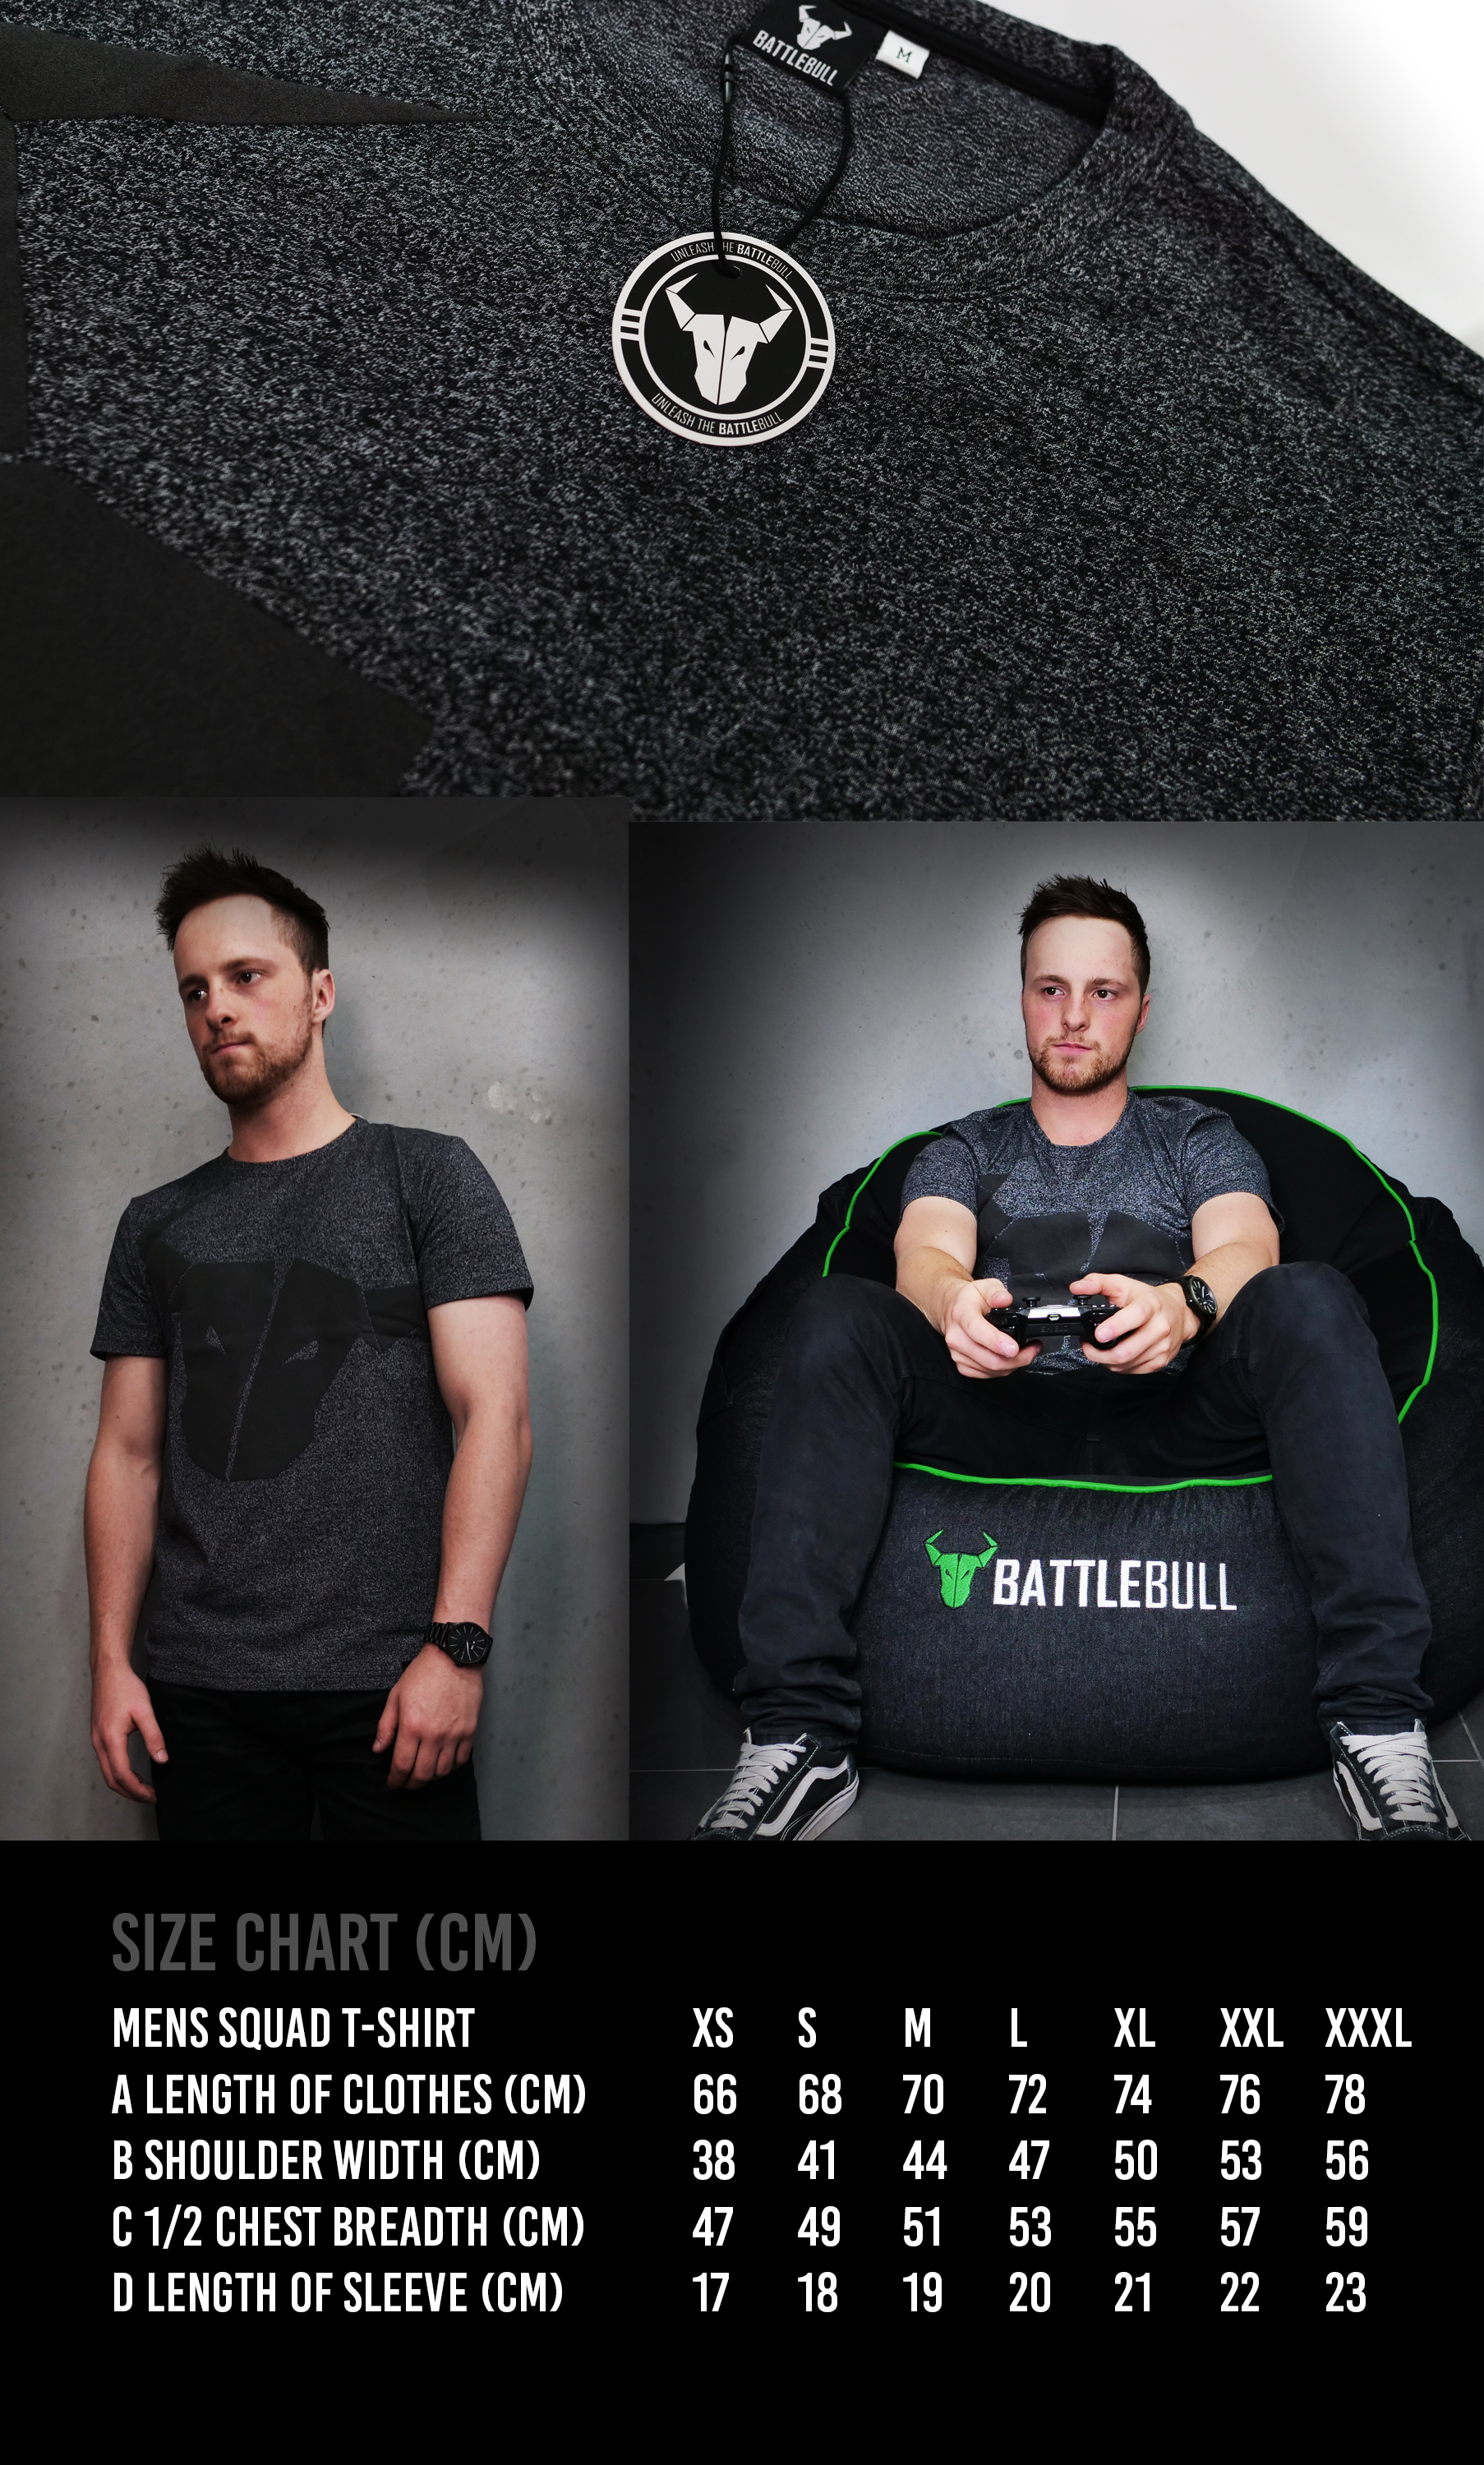 A large marketing image providing additional information about the product BattleBull Squad T-Shirt Black/Black - Size Large (L) - Additional alt info not provided